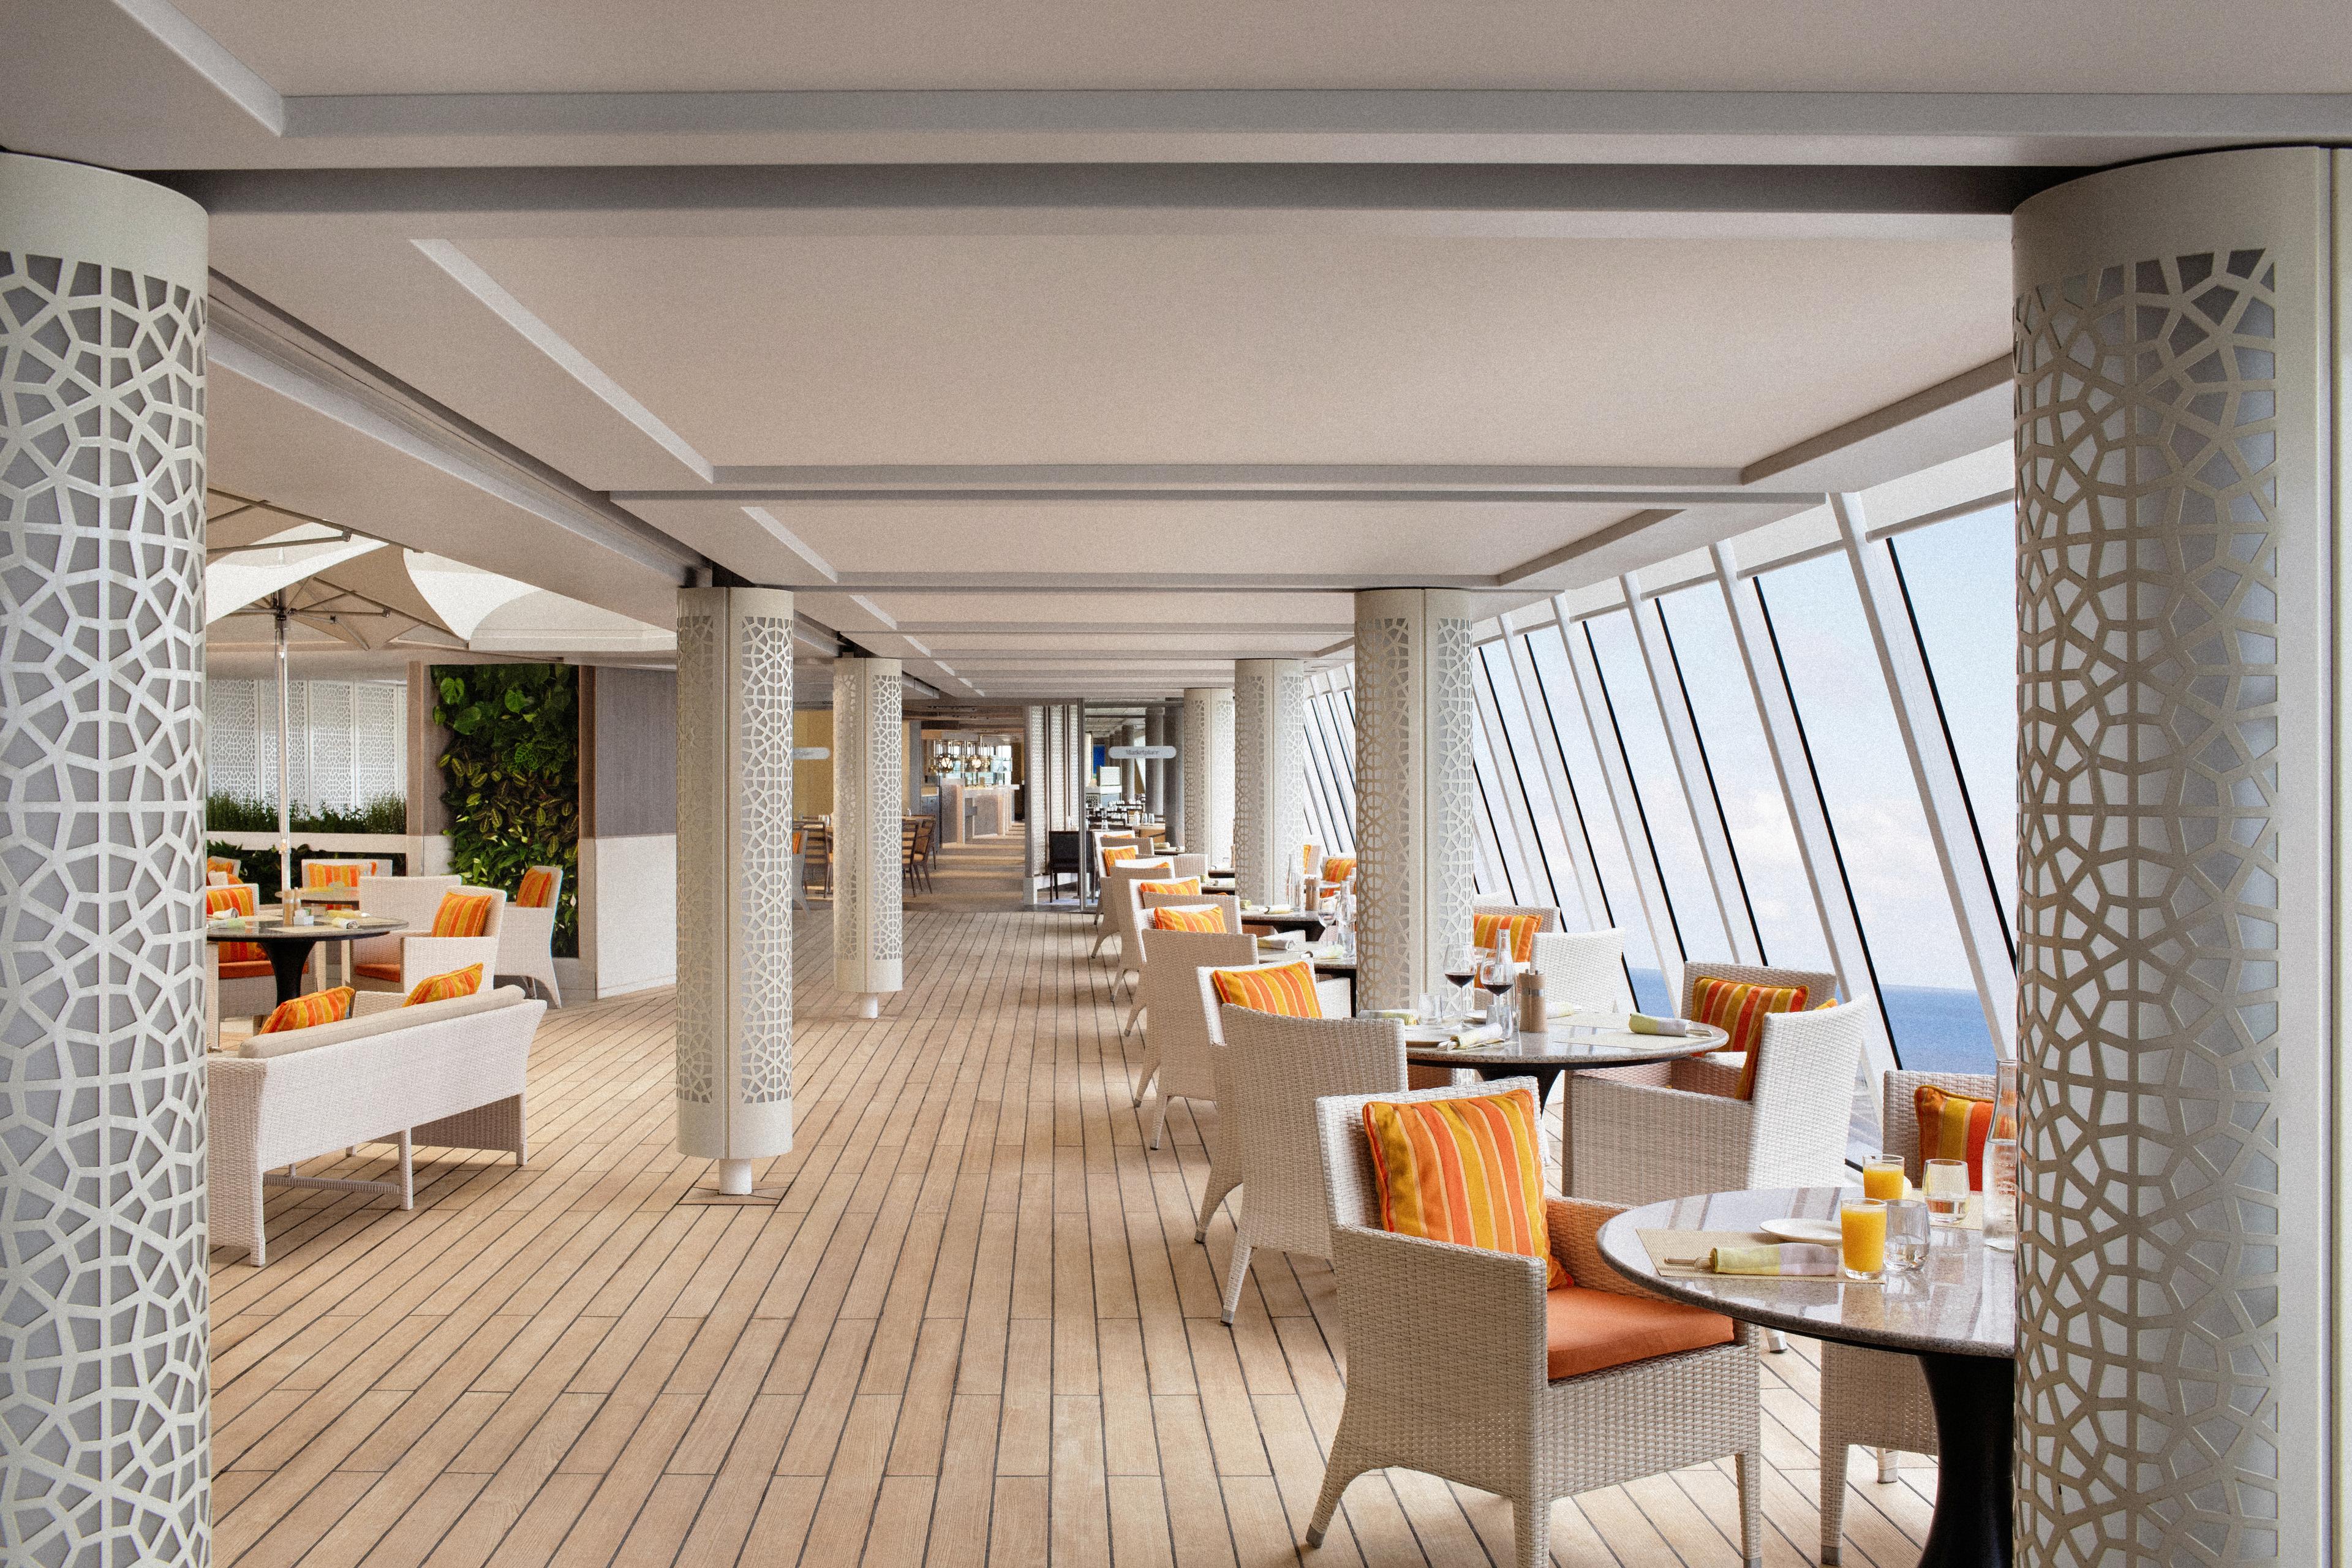 TRIDENT GRILL, CRYSTAL SERENITY